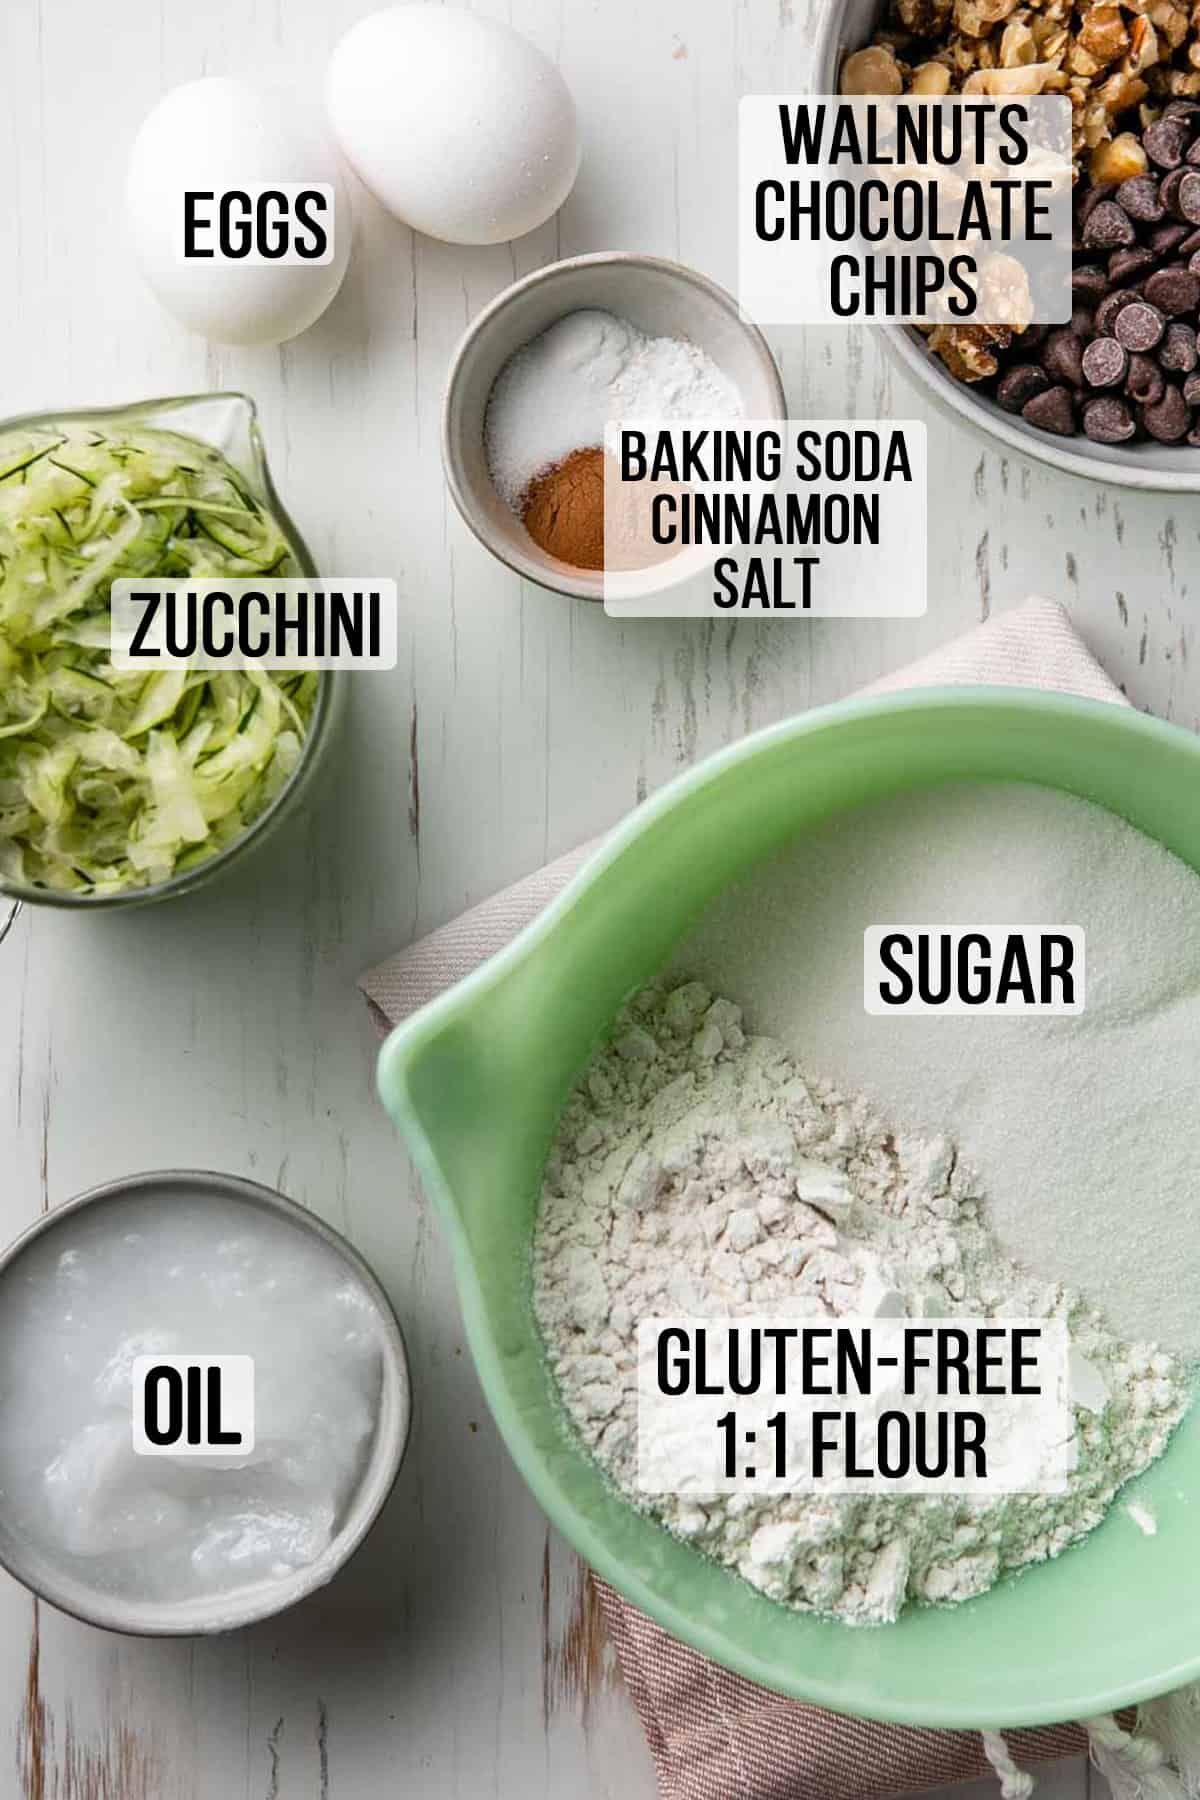 Gluten free flour, sugar, shredded zucchini, oil and remaining ingredients measured out in bowls.